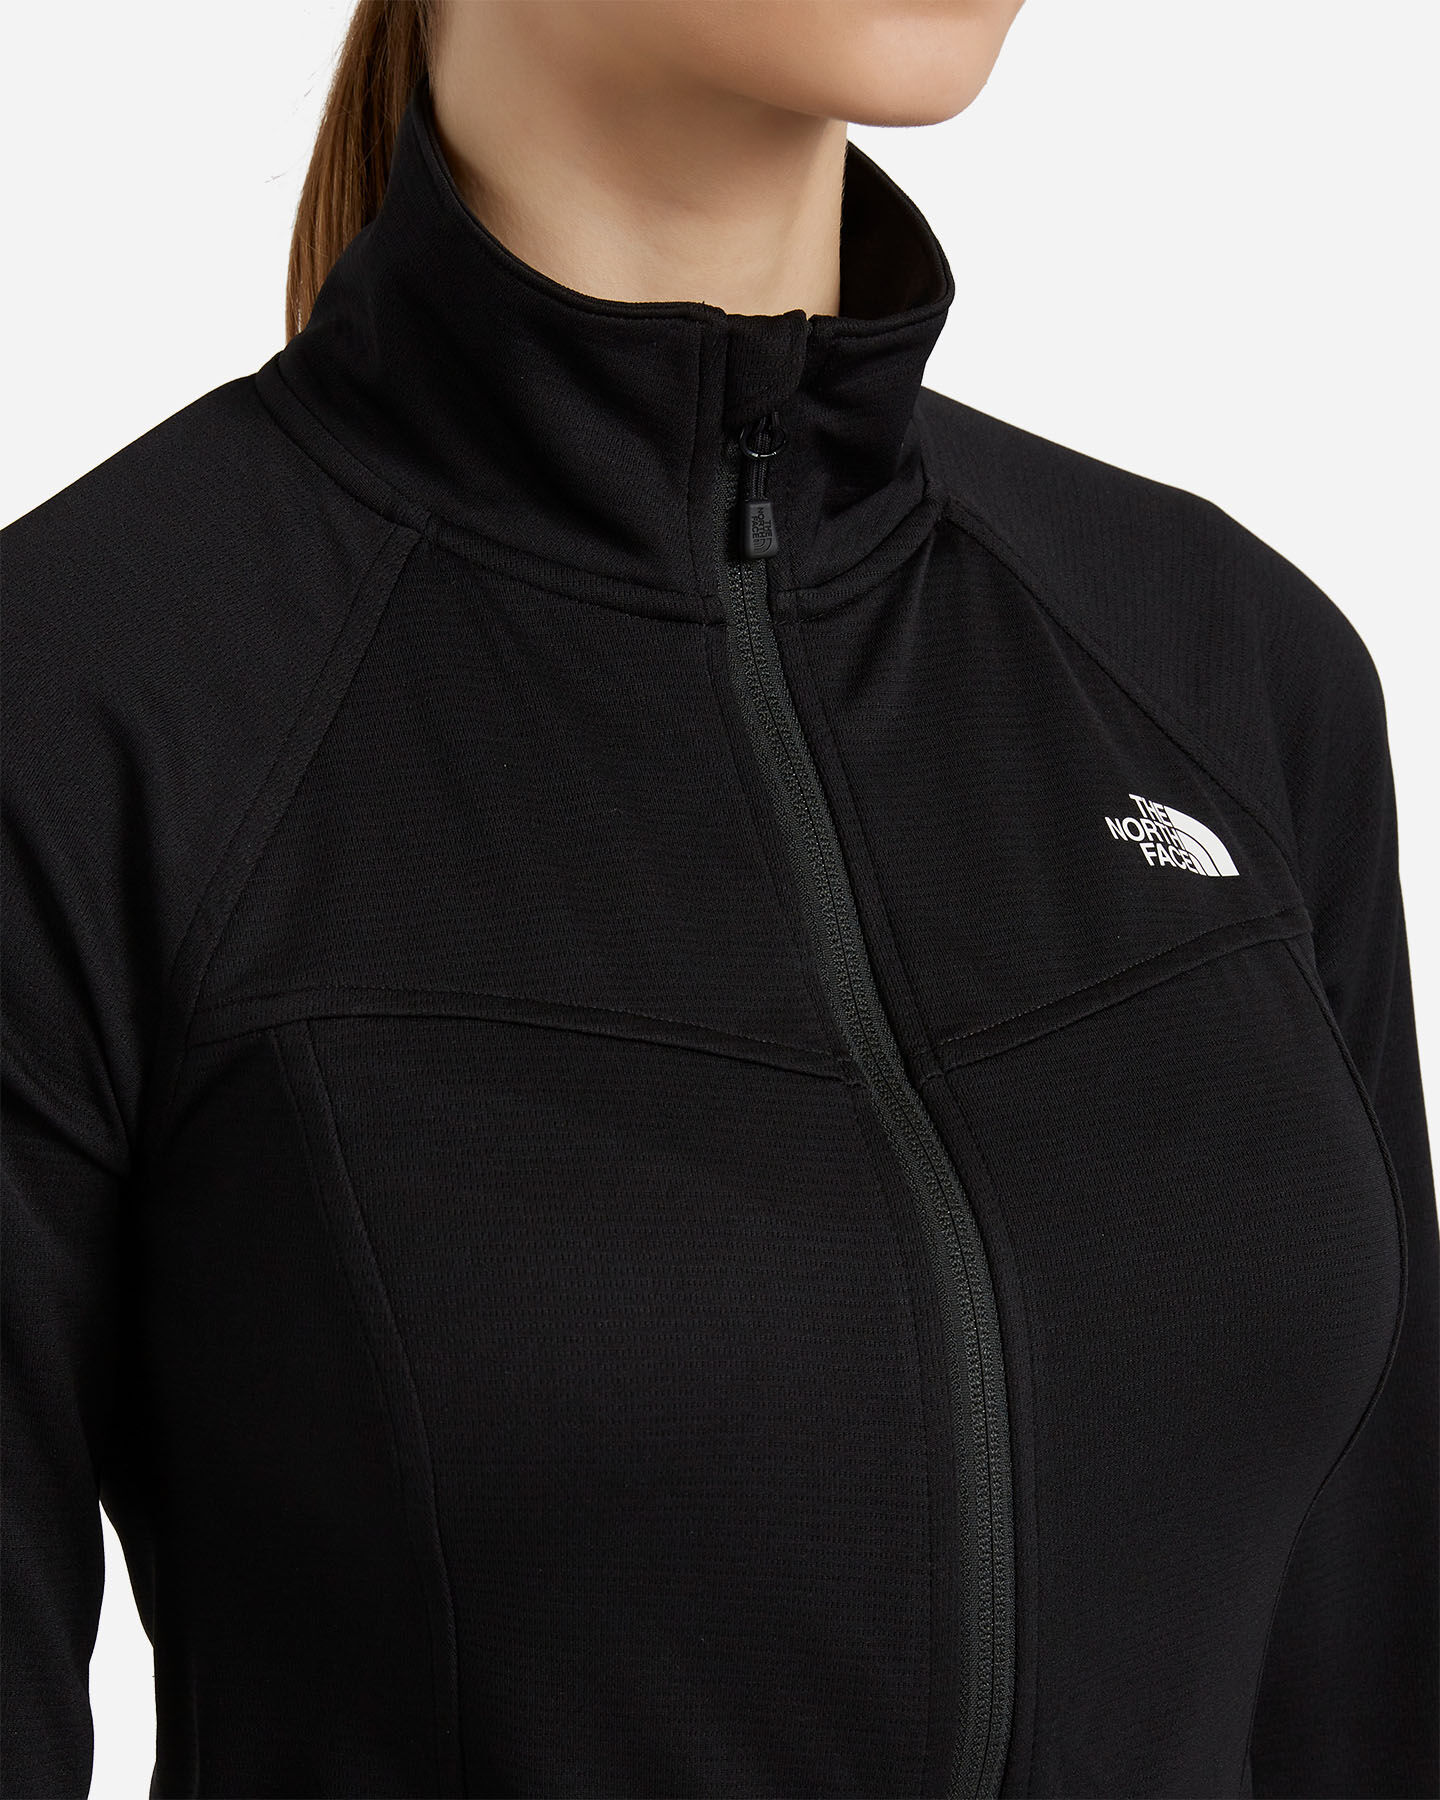  Pile THE NORTH FACE EXTENT III W S5181579|JK3|XS scatto 4